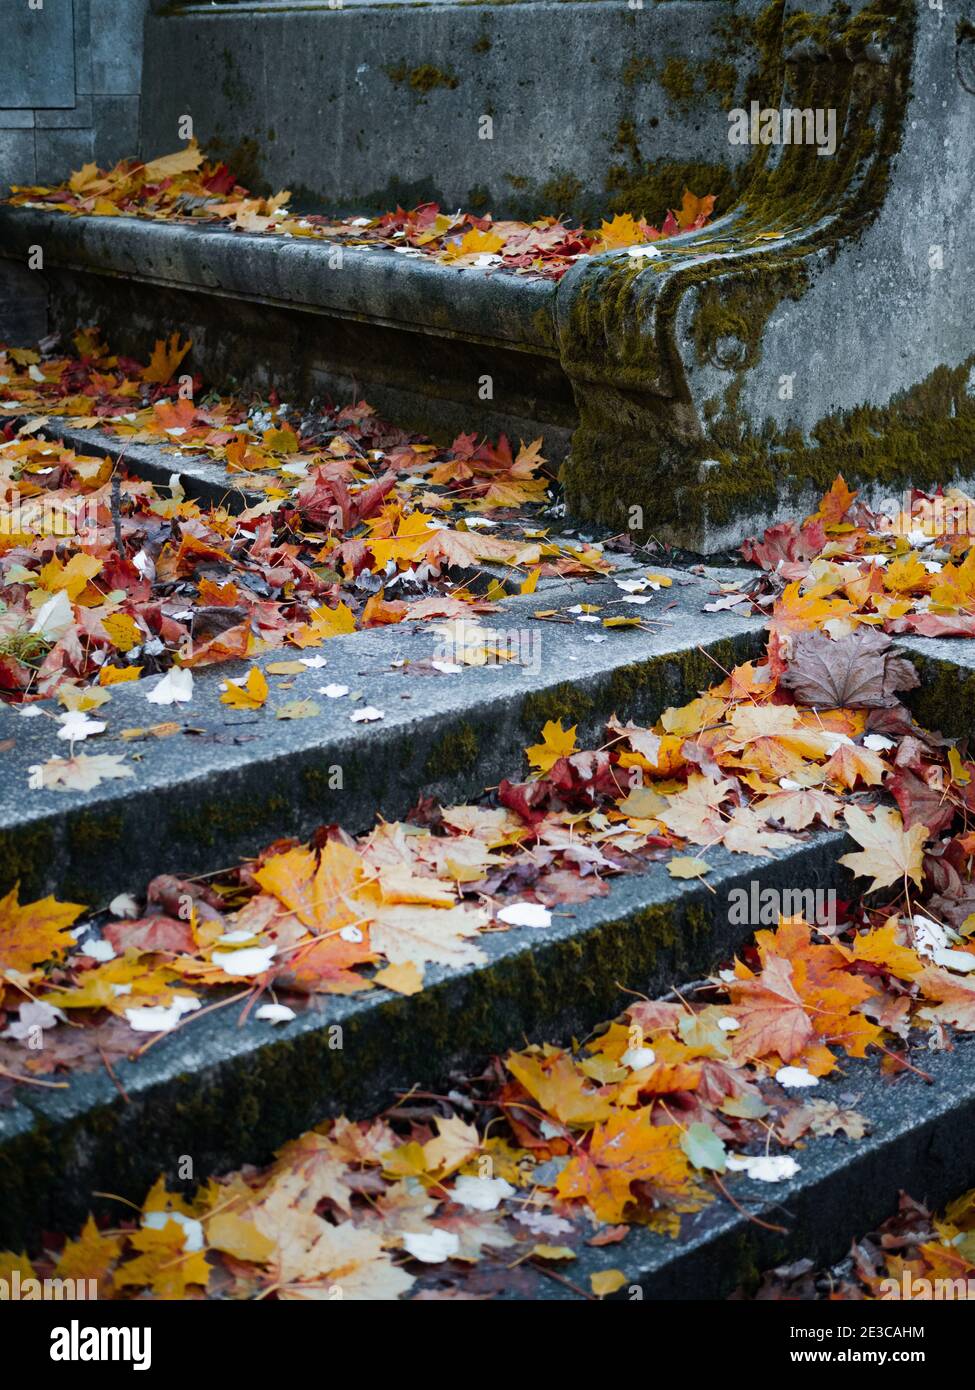 The old Catholic cemetery in the fall. Abandoned graves under a layer of fallen leaves. Stone steps and a bench in front of the entrance to the crypt. Stock Photo